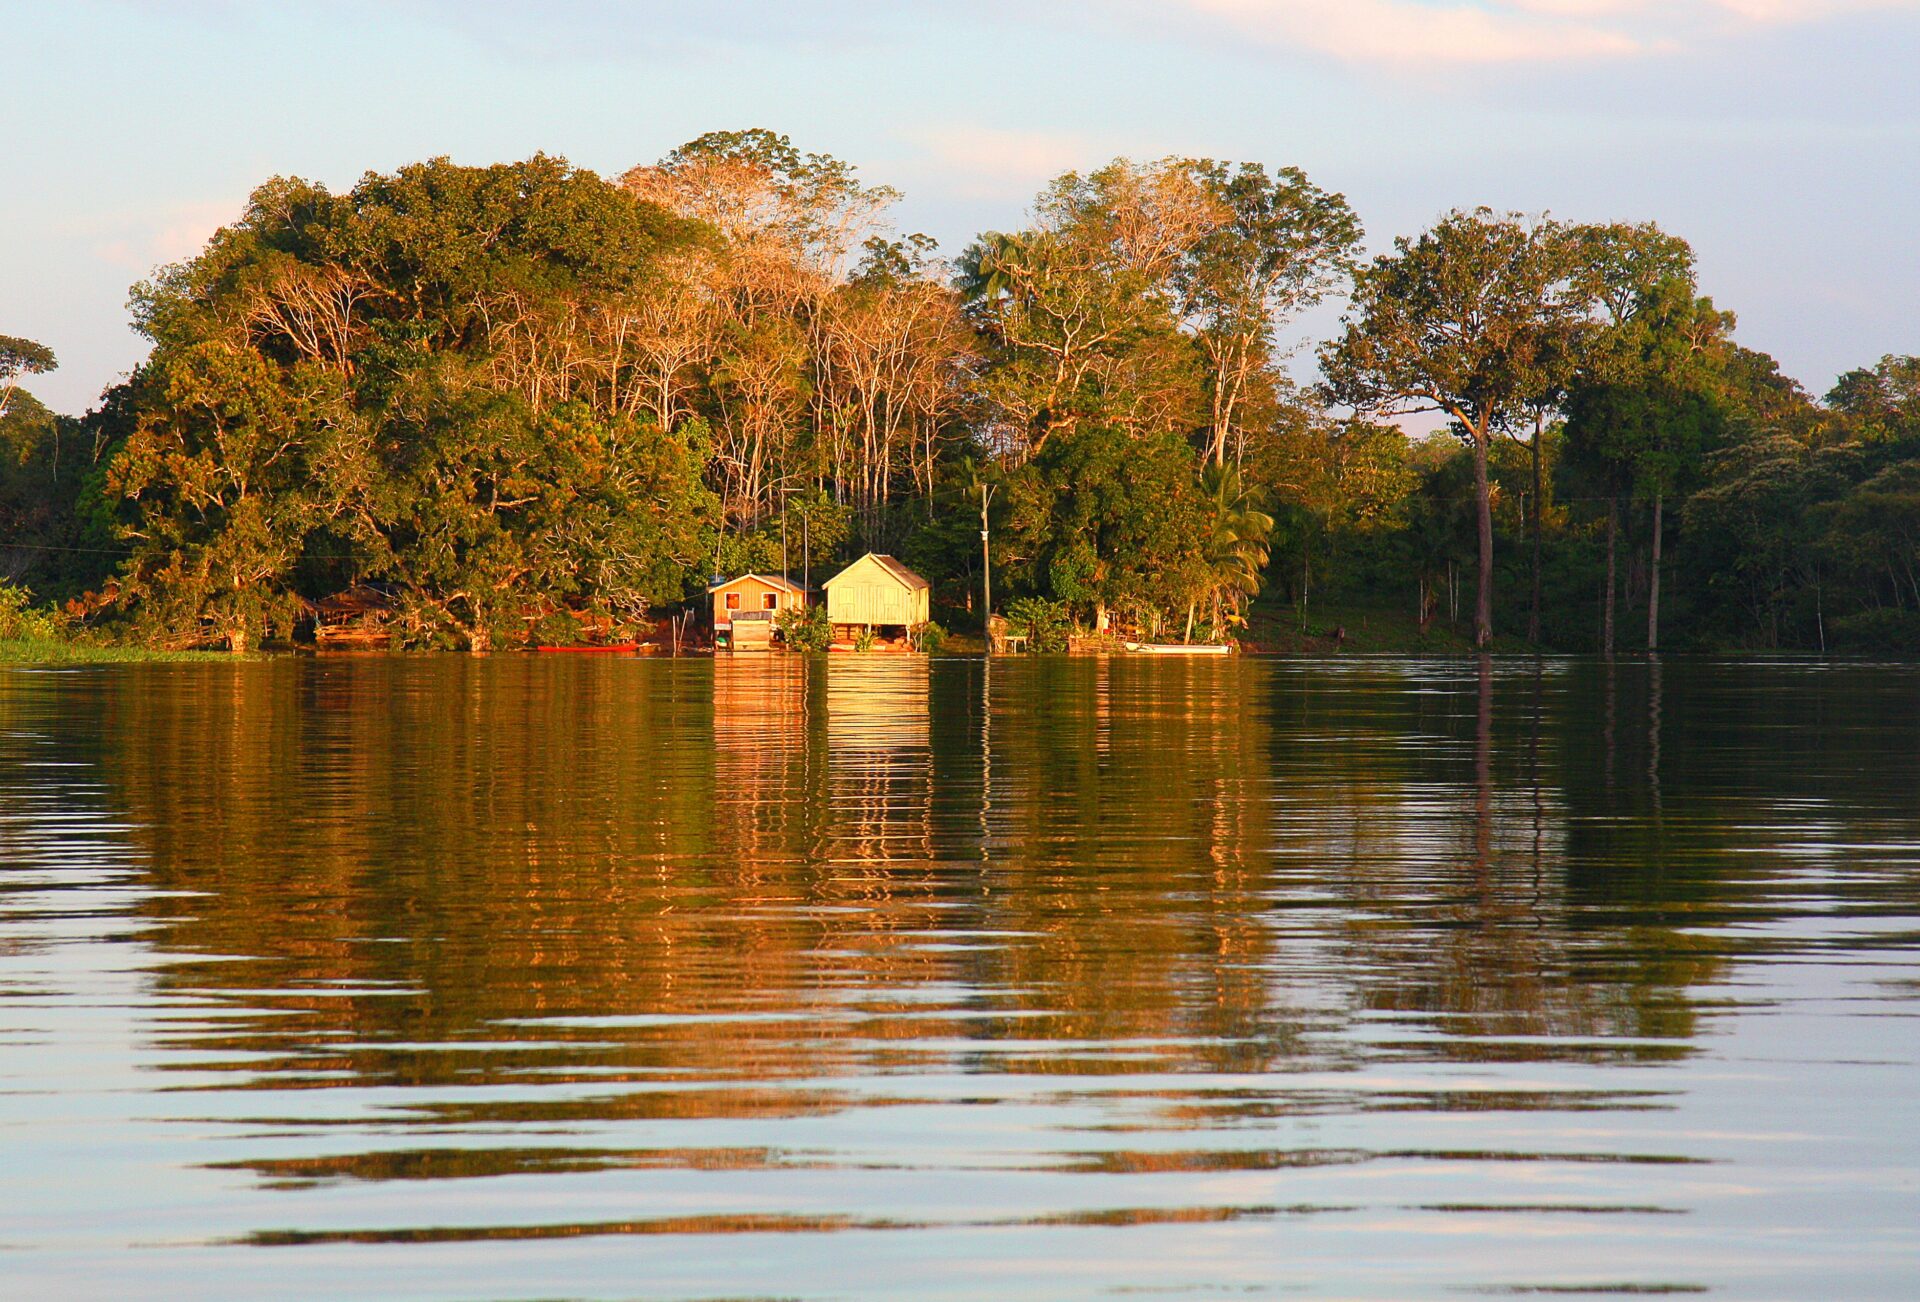 Houses on the bank of a body of water in the Amazon rainforest in Ecuador.